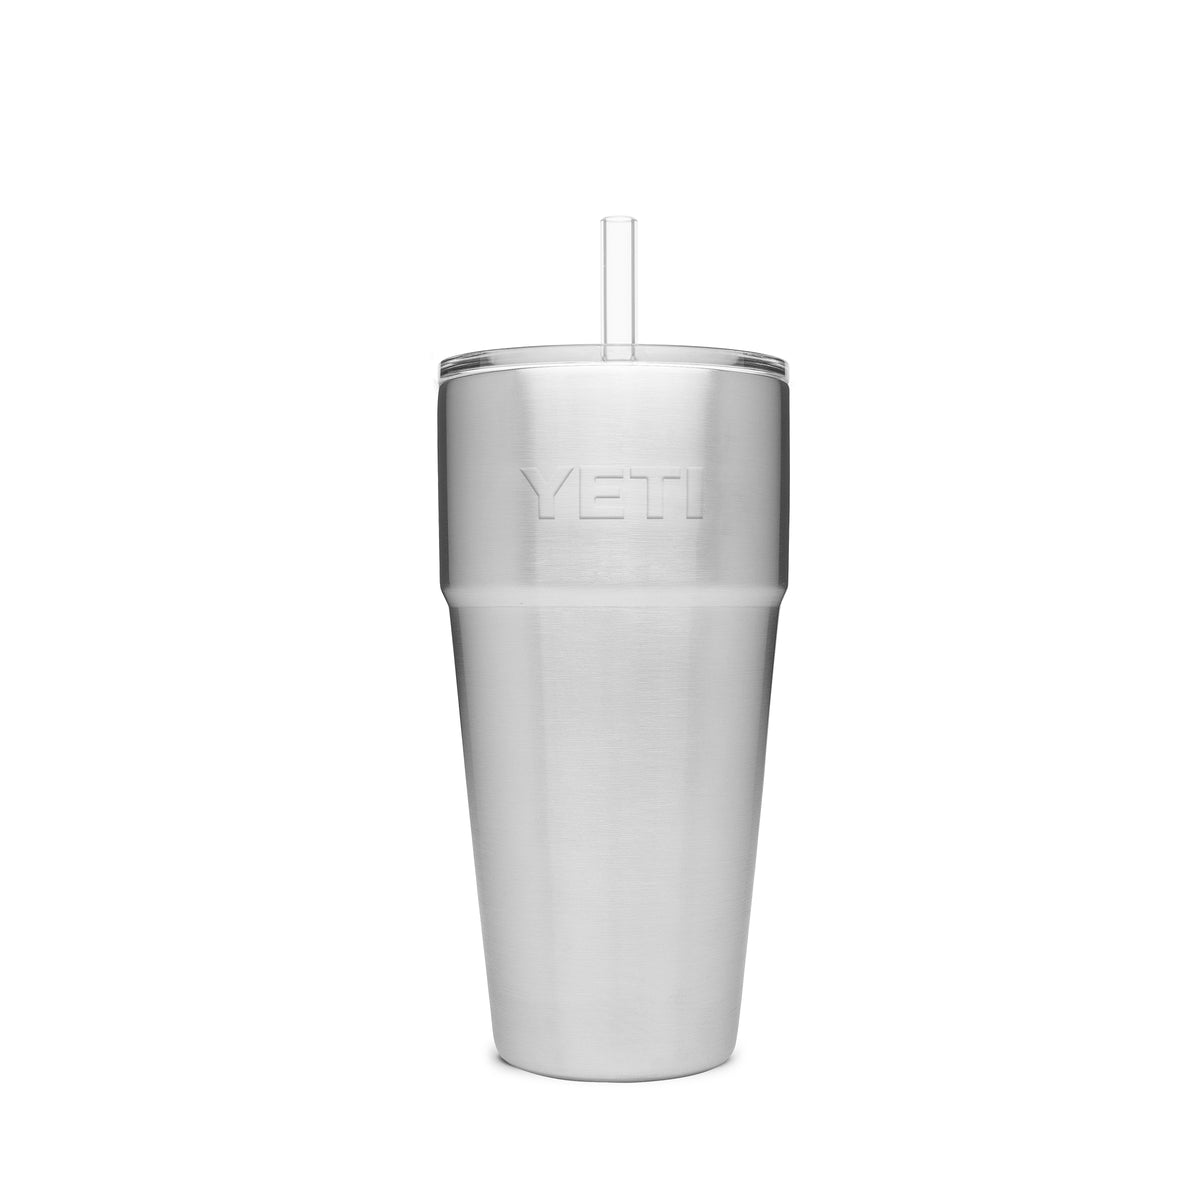 26oz Custom Engraved YETI Stackable Tumbler with Straw Lid